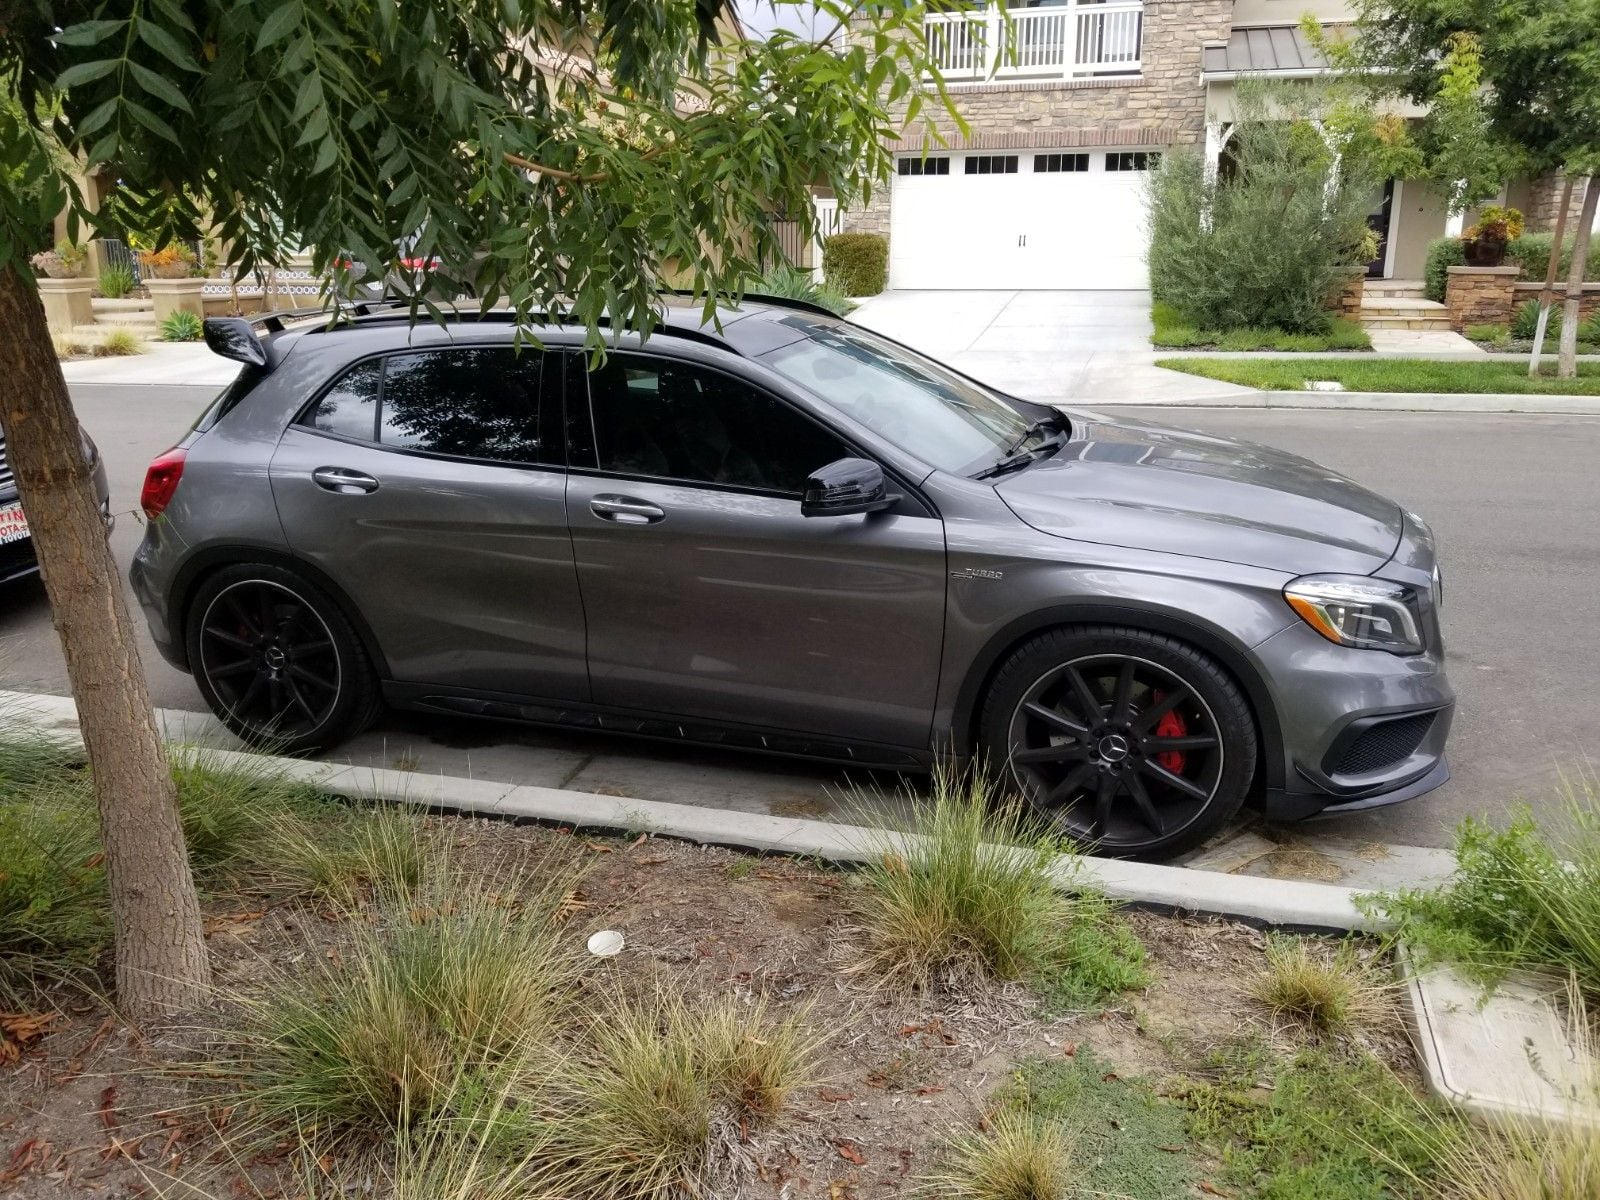 Steering/Suspension - Mercedes gla45 AMG h&r lowering springs - Used - 2015 to 2019 Mercedes-Benz GLA45 AMG - Irvine, CA 92618, United States